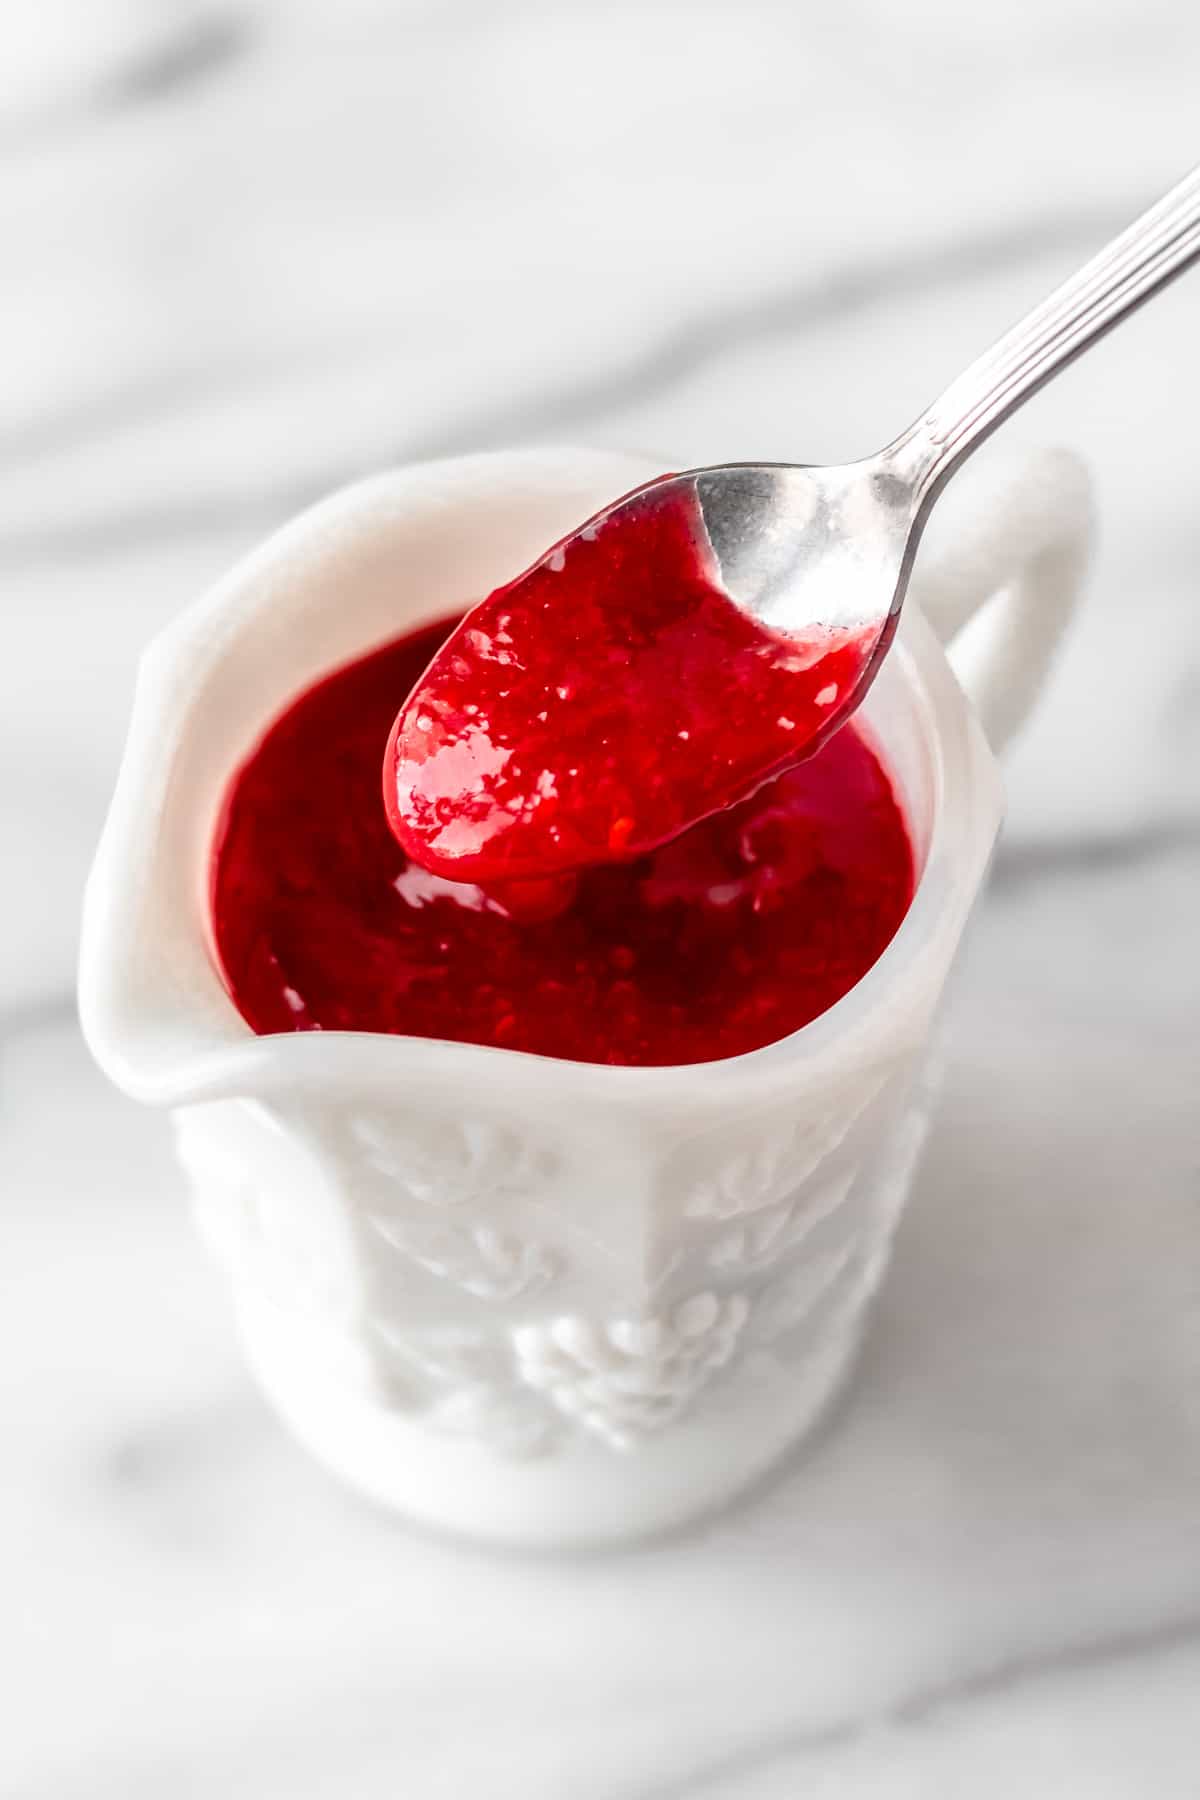 A spoonful of homemade raspberry sauce being lifted up over a cup of sauce.